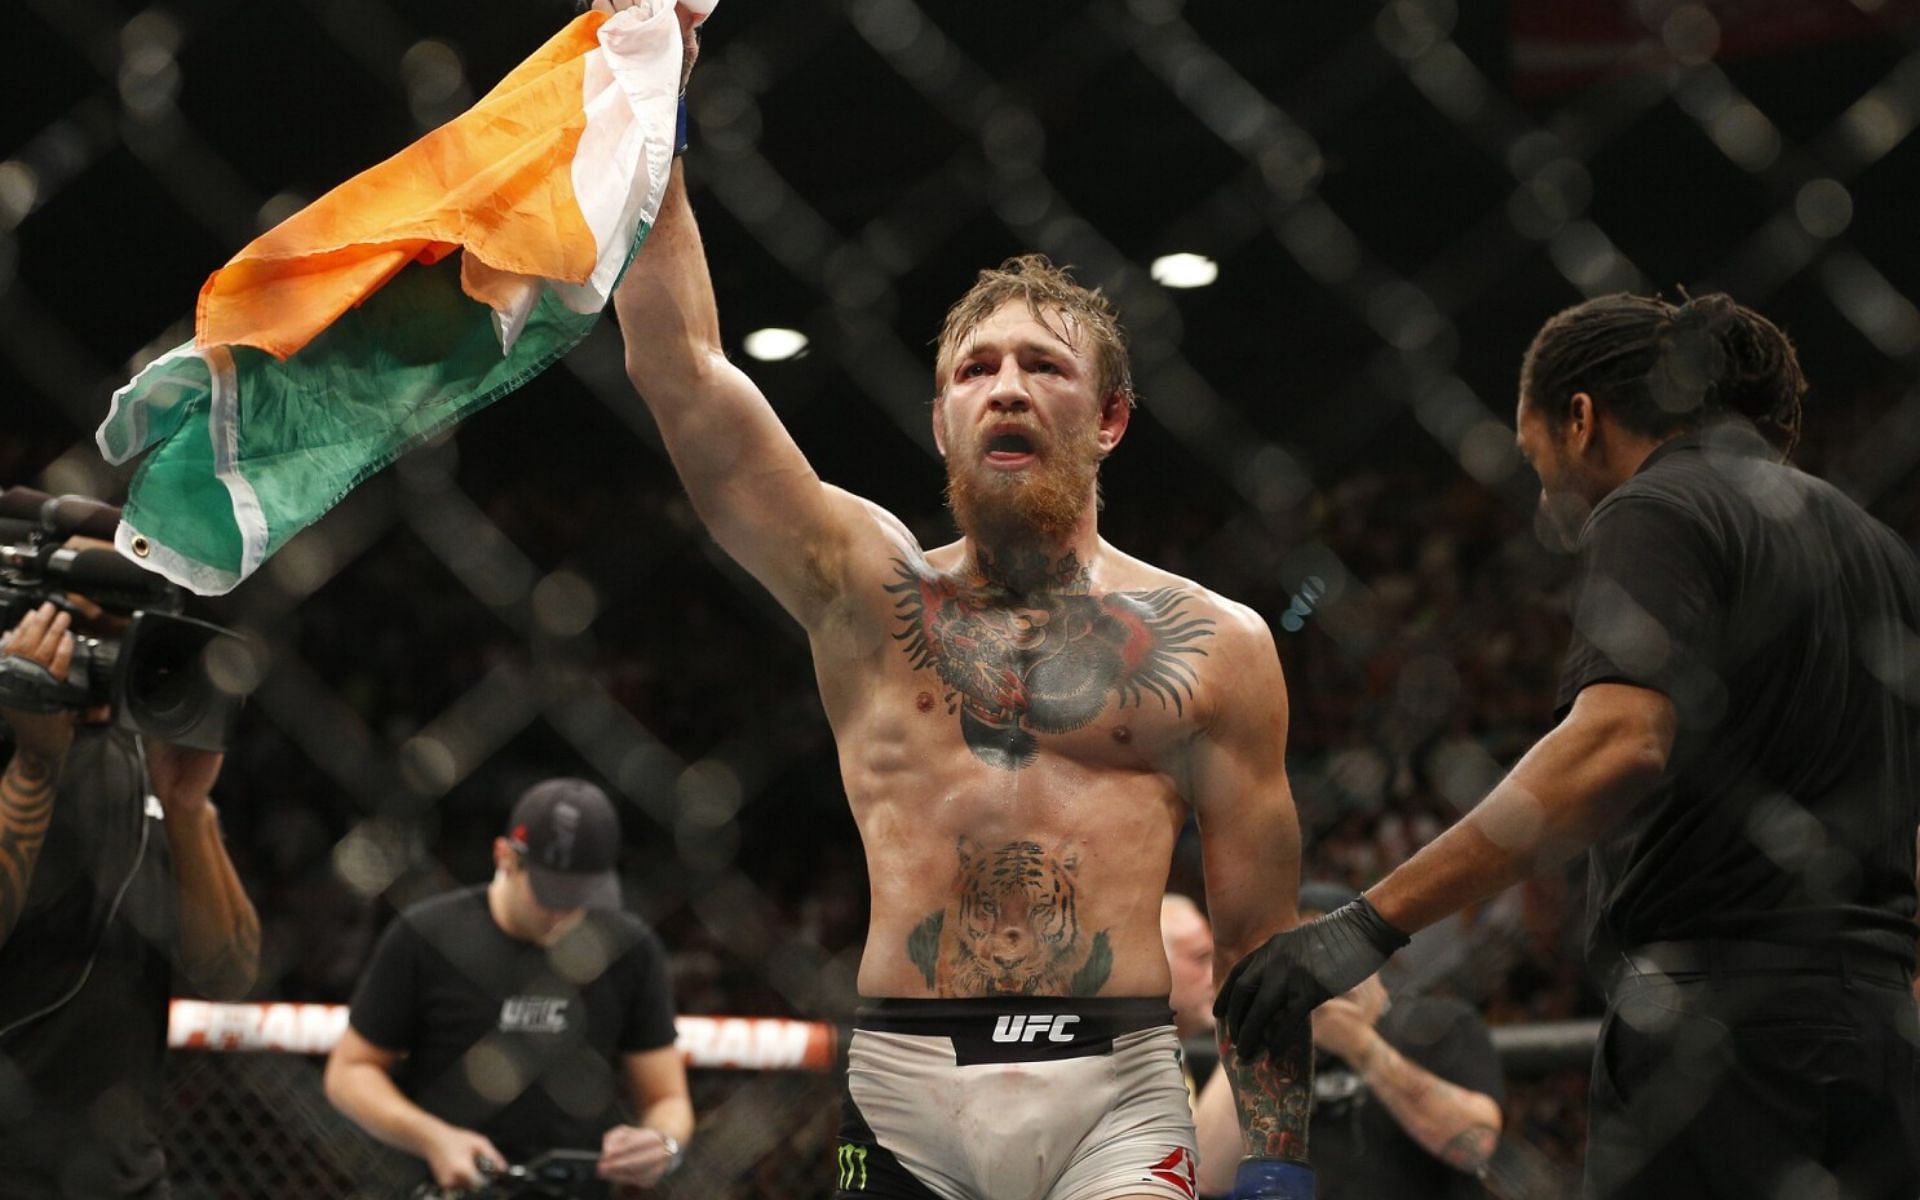 Conor McGregor was involved in a huge fight during International Fight Week in 2015